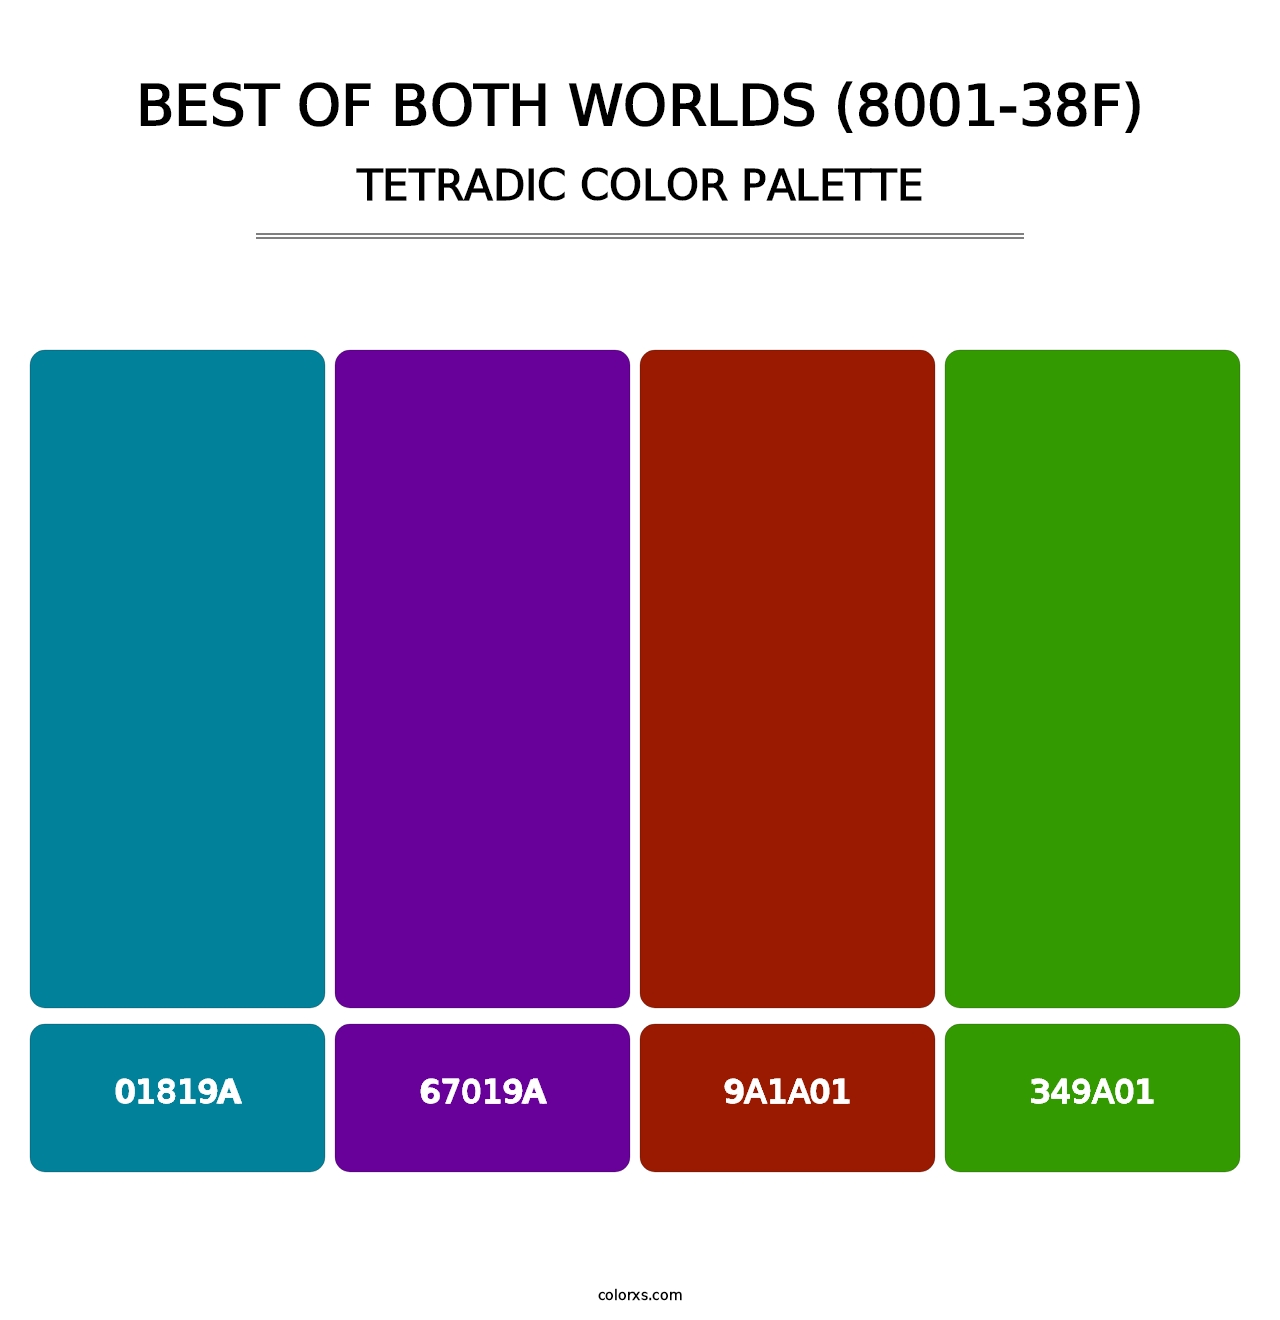 Best of Both Worlds (8001-38F) - Tetradic Color Palette